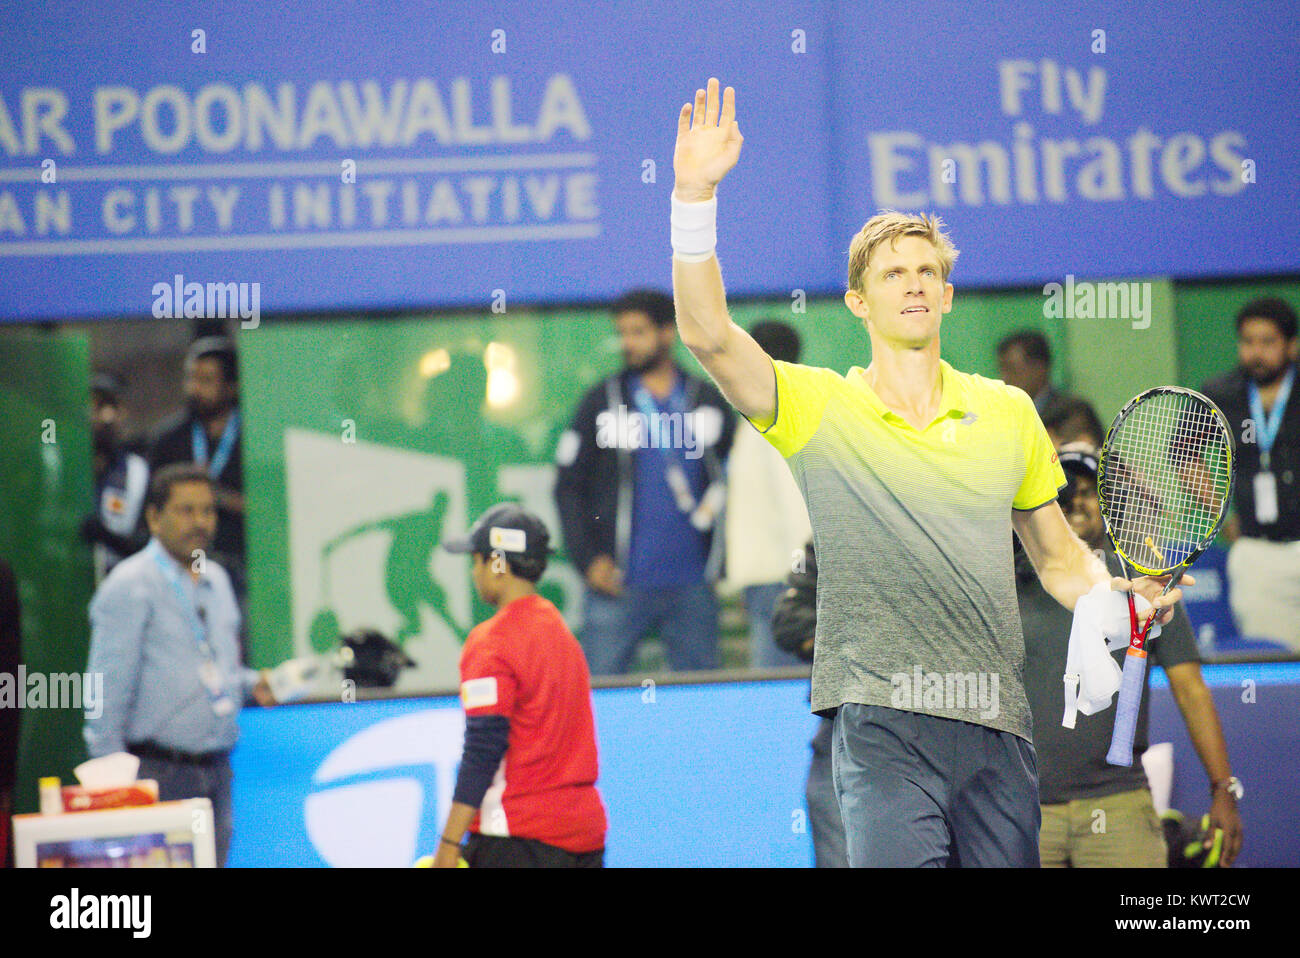 Pune, India. 5th January 2018. Kevin Anderson of South Africa waves to the crowd after winning his semi-final match at the Tata Open Maharashtra tournament at Mahalunge Balewadi Tennis Stadium in Pune, India. Credit: Karunesh Johri/Alamy Live News. Stock Photo